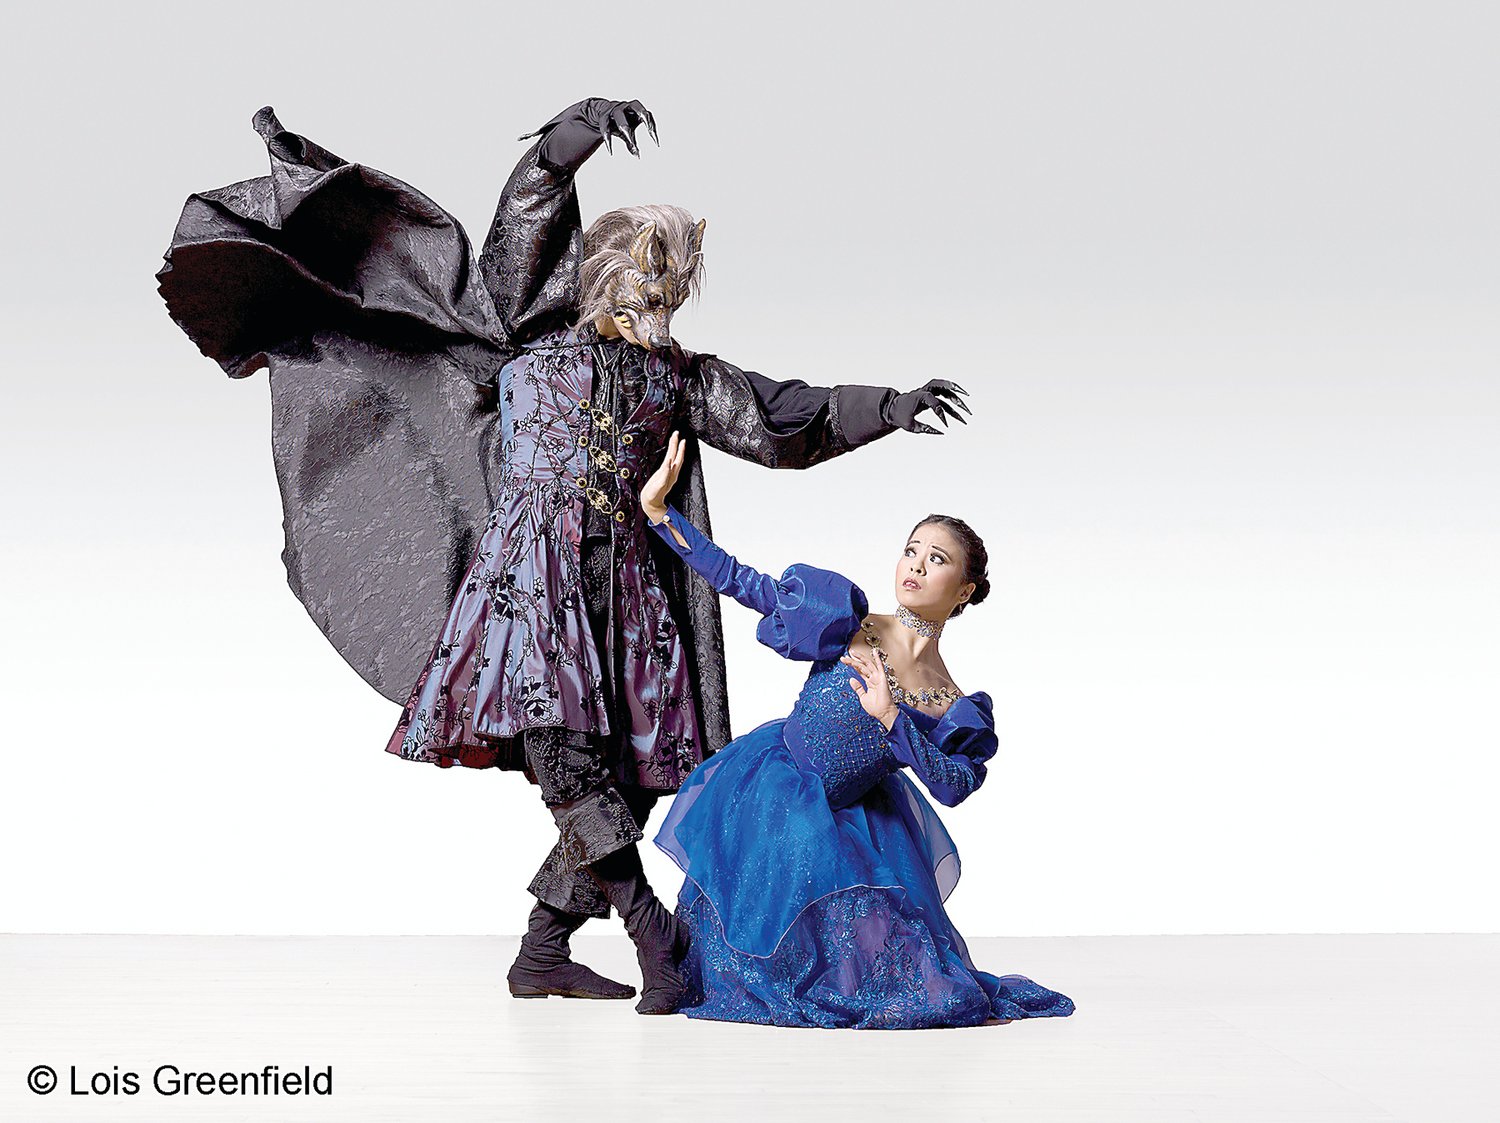 American Repertory Ballet presents “Beauty and the Beast,” with costume designs by Janessa Cornell Urwin.